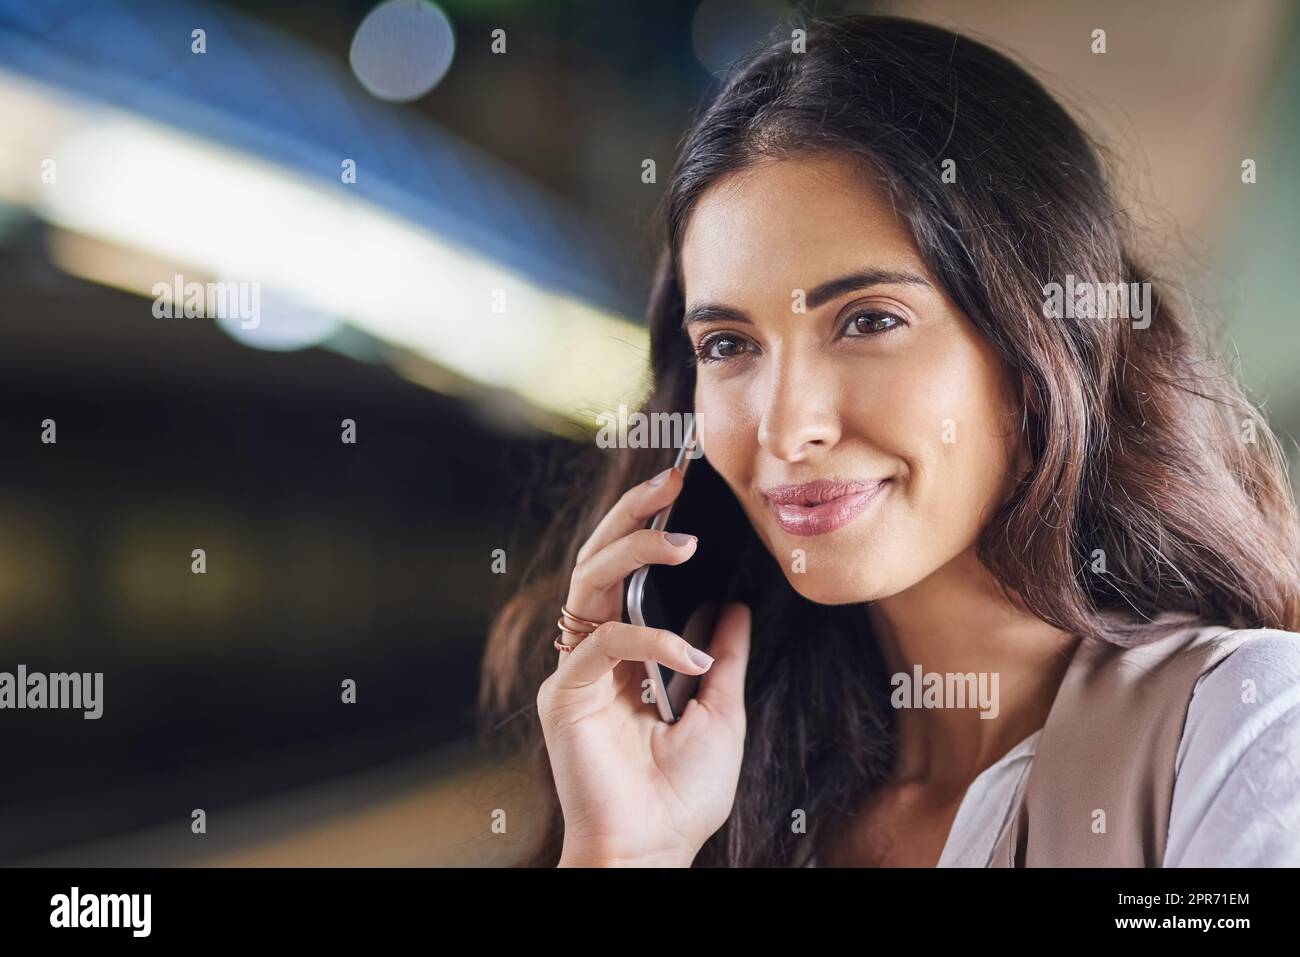 Hearing great news while commuting. Cropped shot of a young attractive woman on a call and using the train to commute. Stock Photo